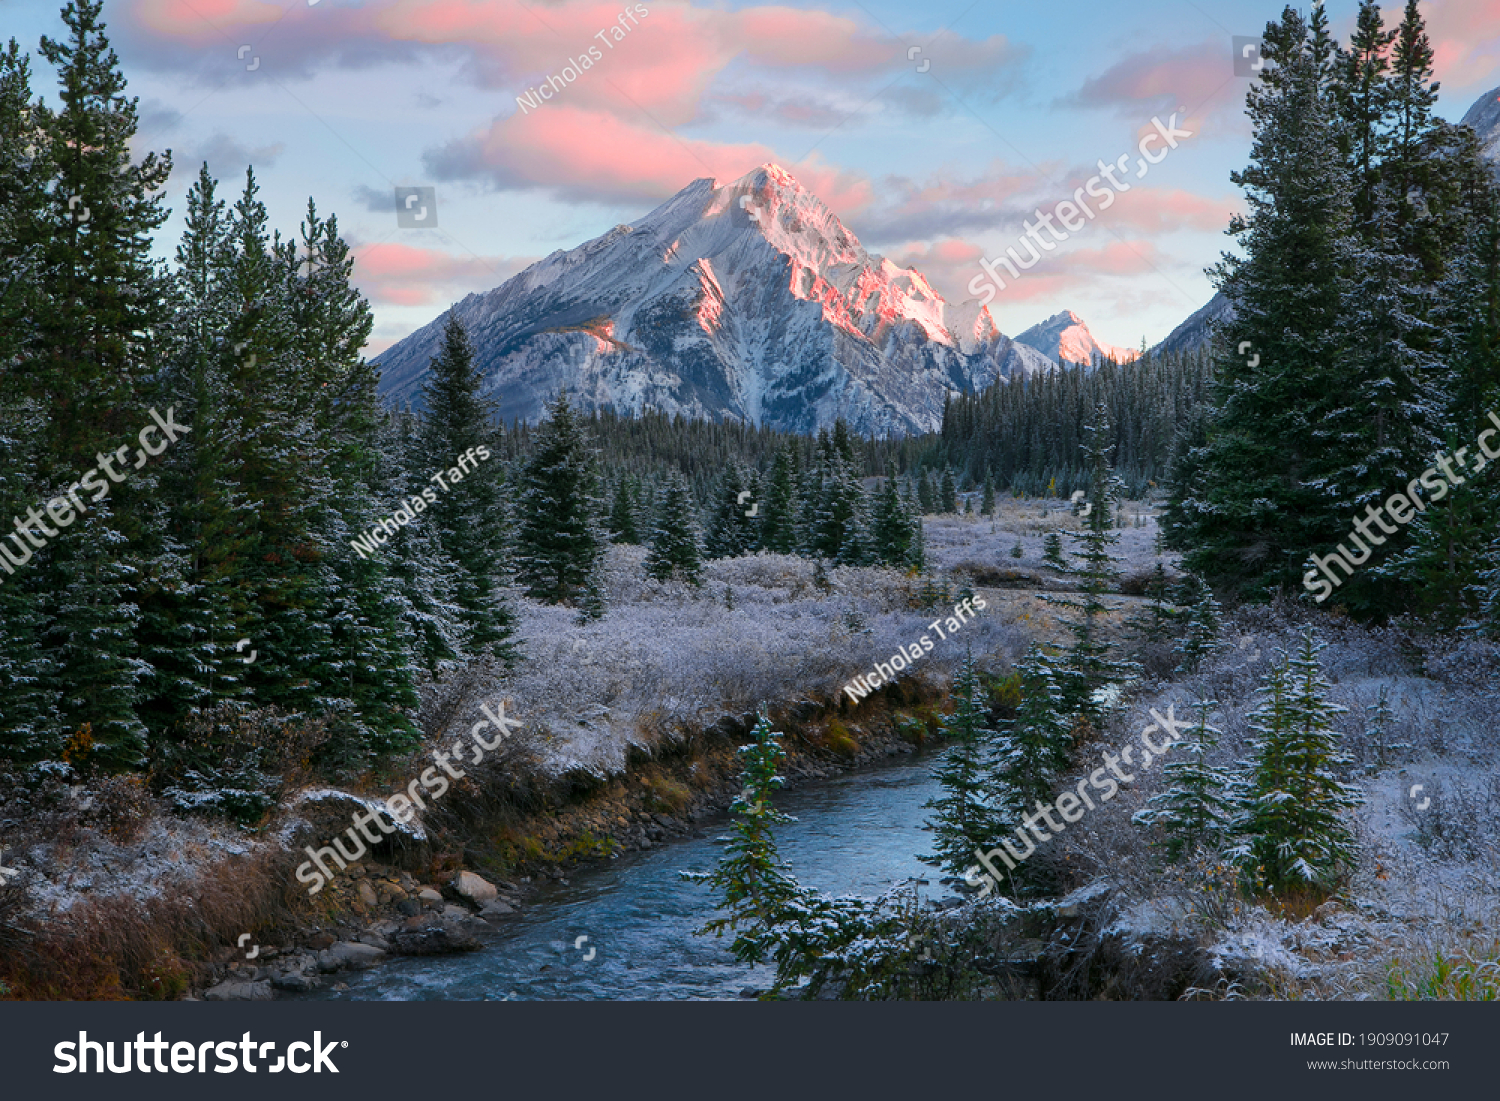 Canadian Rocky Mountain nature scene during a beautiful sunrise with a dusting of overnight snow and frost on the trees and ground.  #1909091047